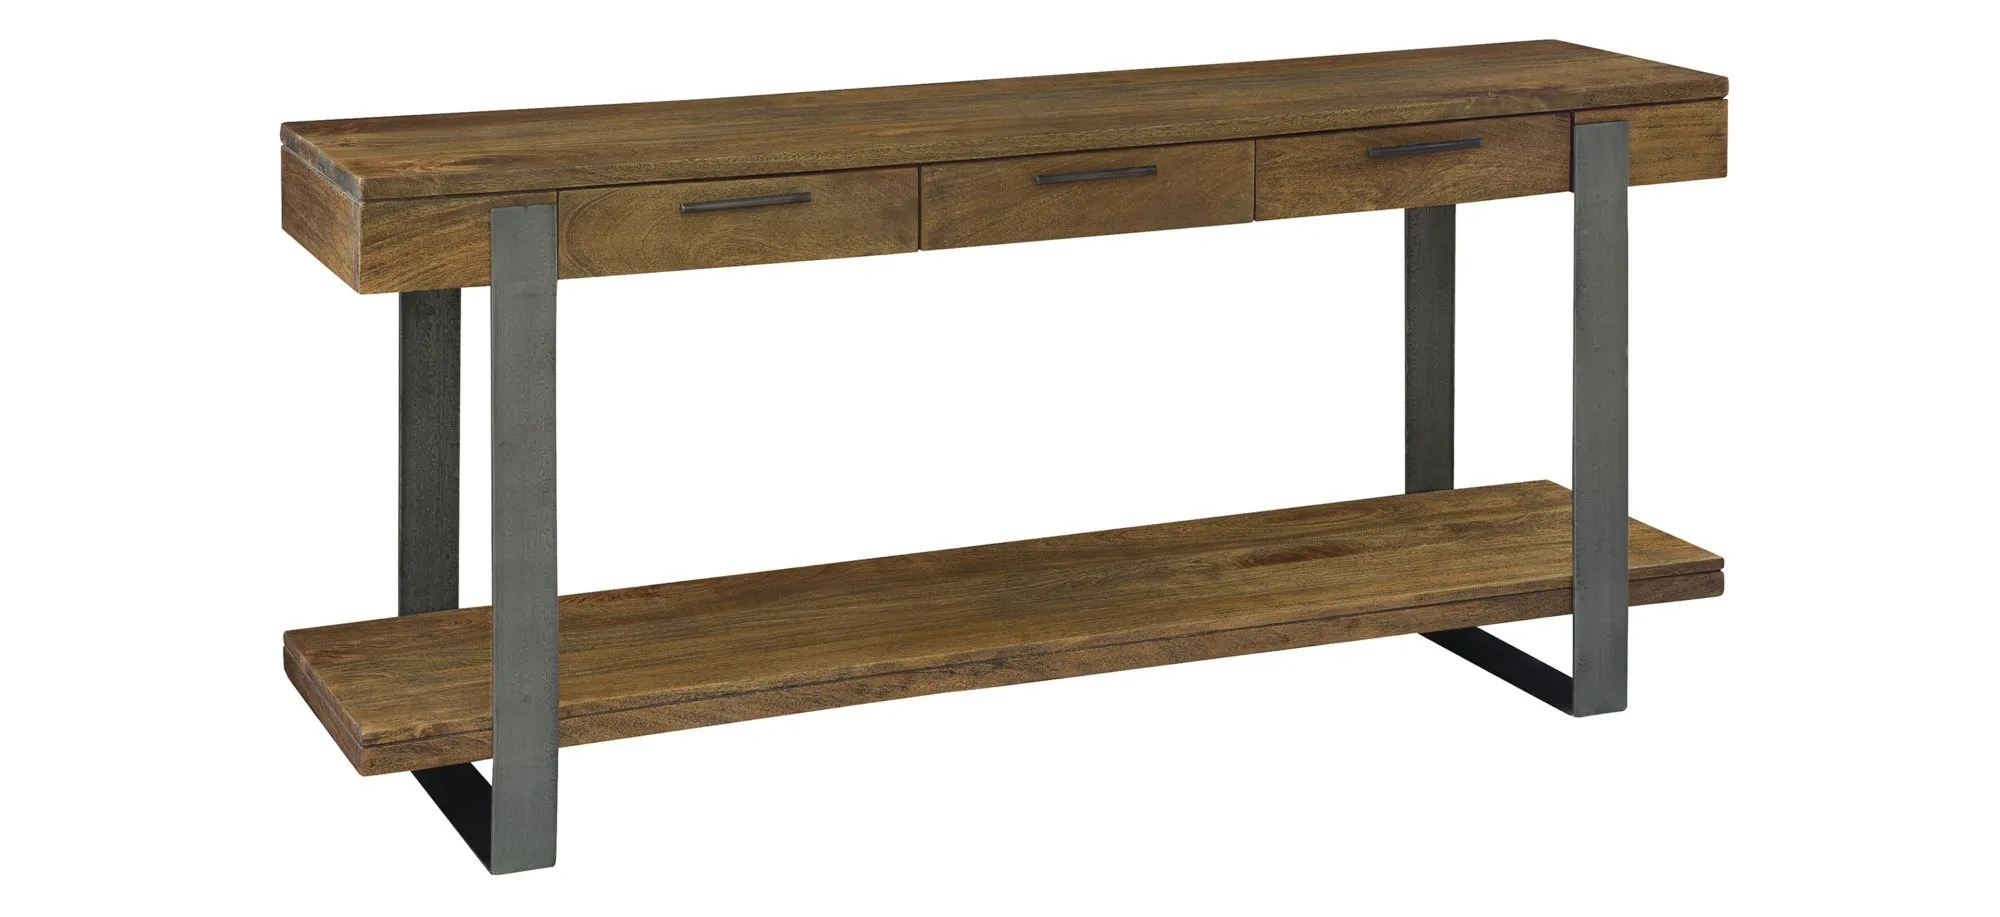 Bedford Park Block Sofa Table in BEDFORD by Hekman Furniture Company